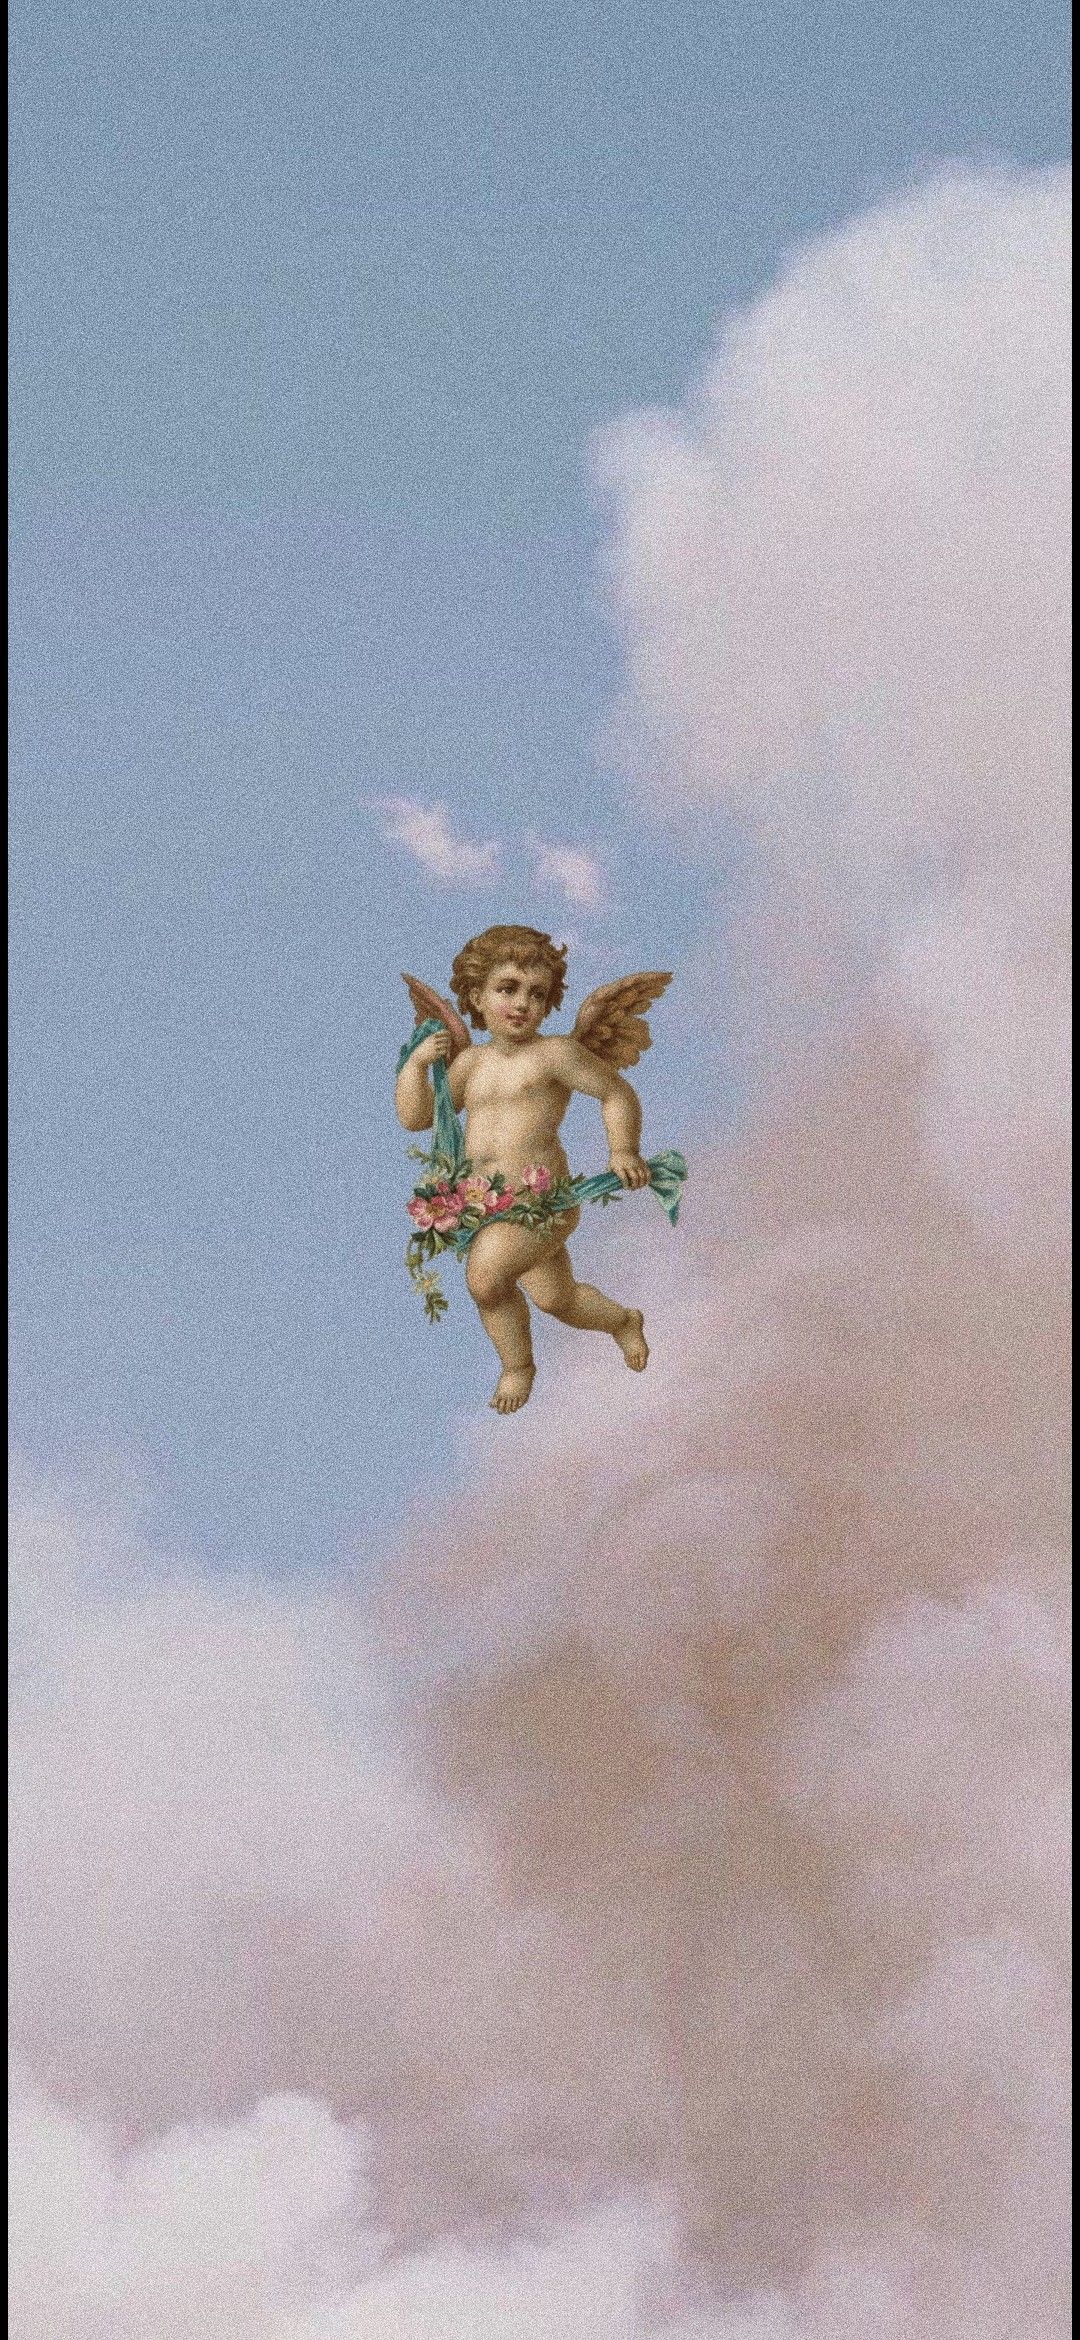 IPhone wallpaper of an angel flying through the clouds - Cupid